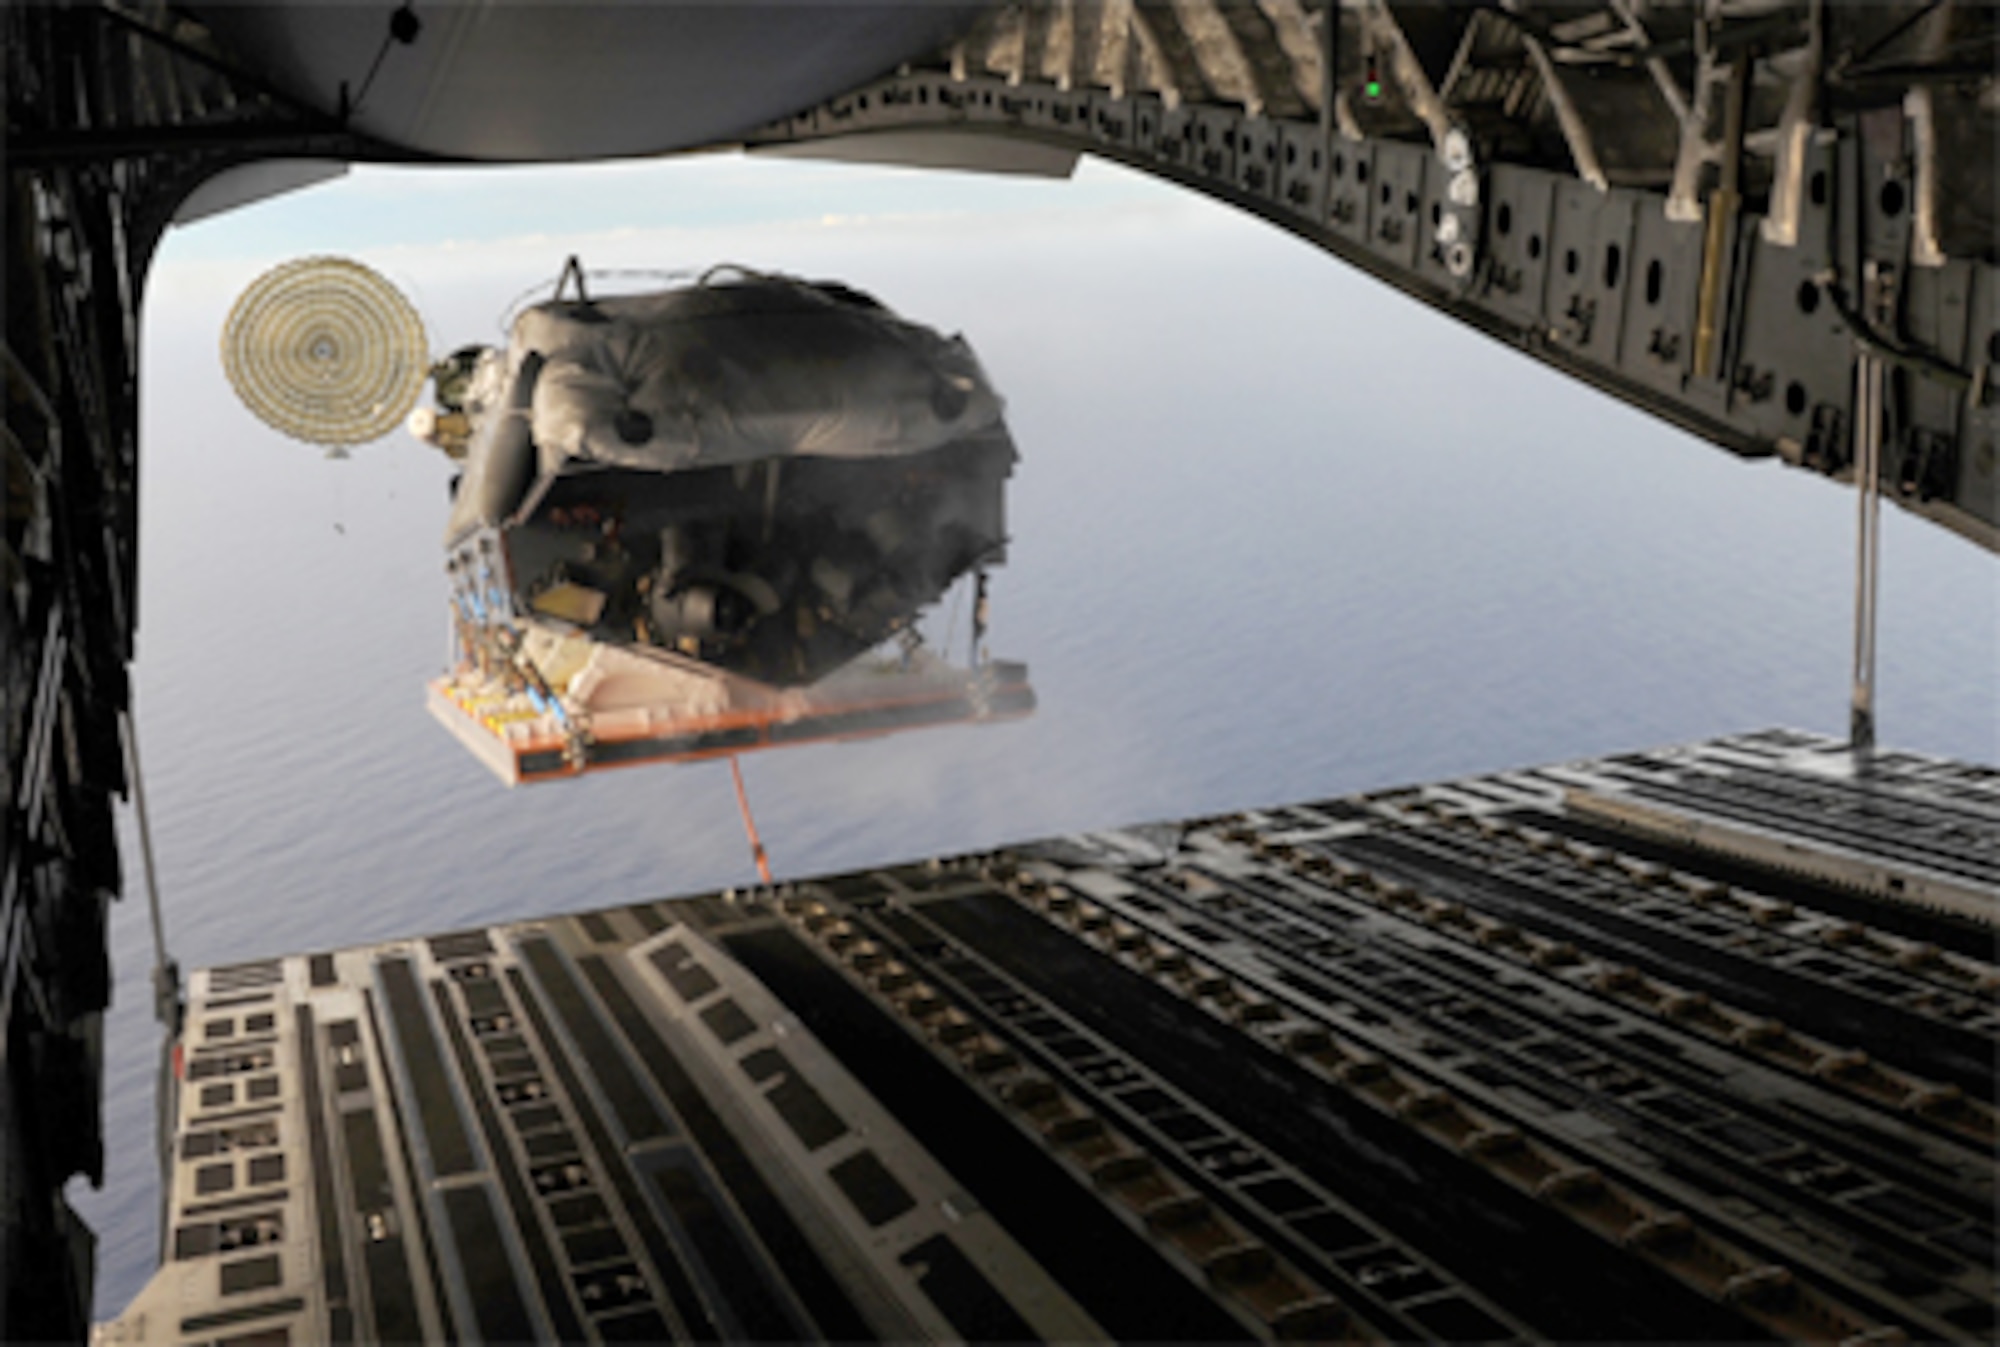 The Navy Special Warfare Unit ONE Maritime Craft Aerial Delivery System deploys from the ramp of a C-17 Globemaster III during airdrop operations Jan. 13, 2011 over the Pacific Ocean near Guam. Nine Sailors jumped out of the back of a C-17 after the aerial drop. Airmen from Joint Base Pearl Harbor-Hickam, Hawaii, worked with the Naval unit to deploy the boat off the coast of Guam while merging the capabilities of the U.S. Air Force and the U.S. Navy. (U.S. Air Force photo/Staff Sgt. Mike Meares)